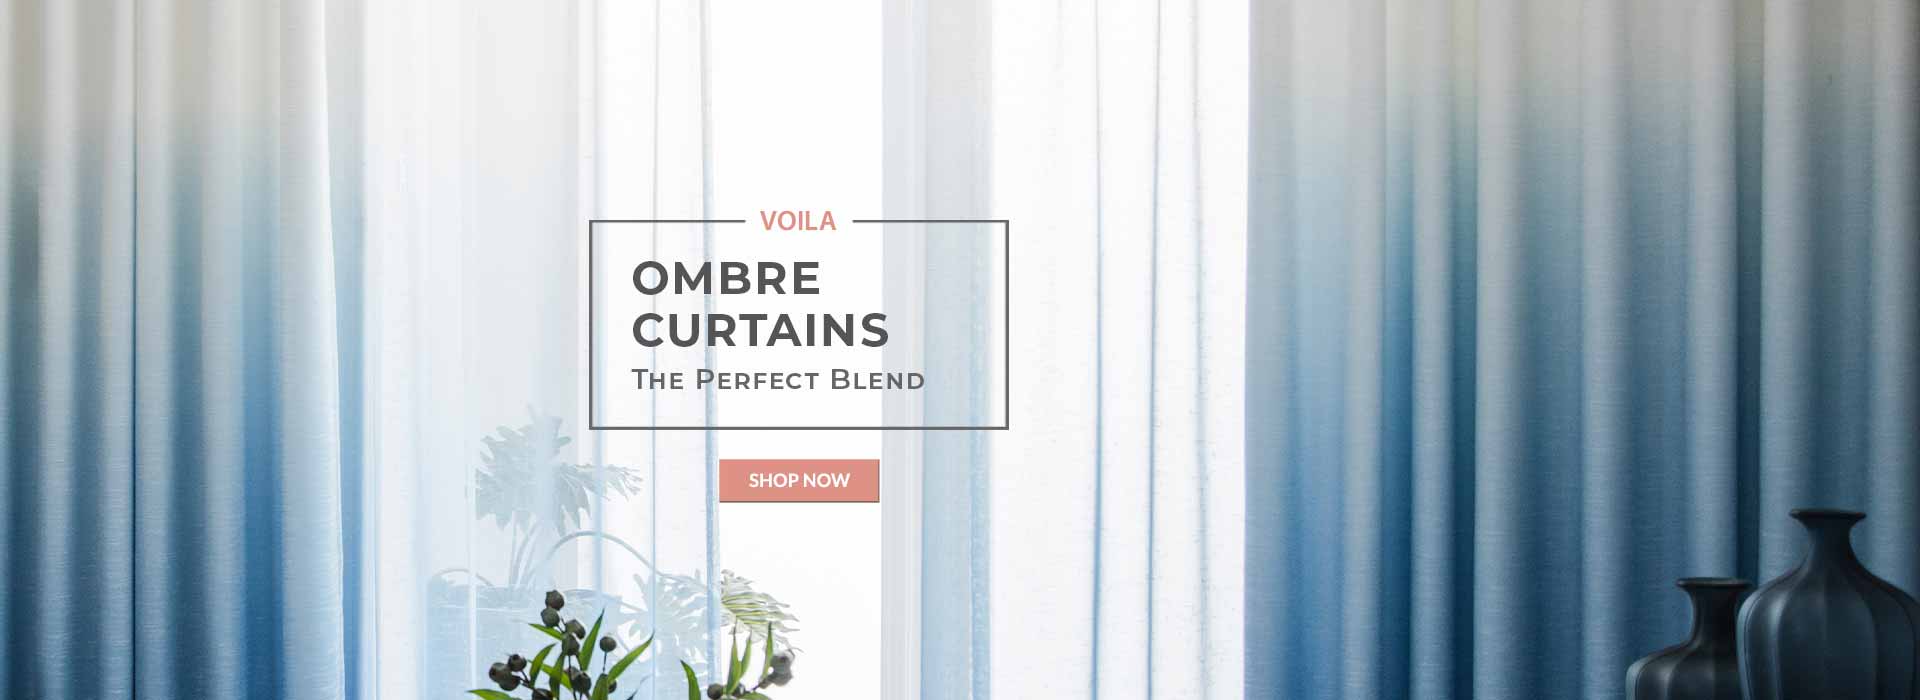 The Perfect Blend Ombre Curtains